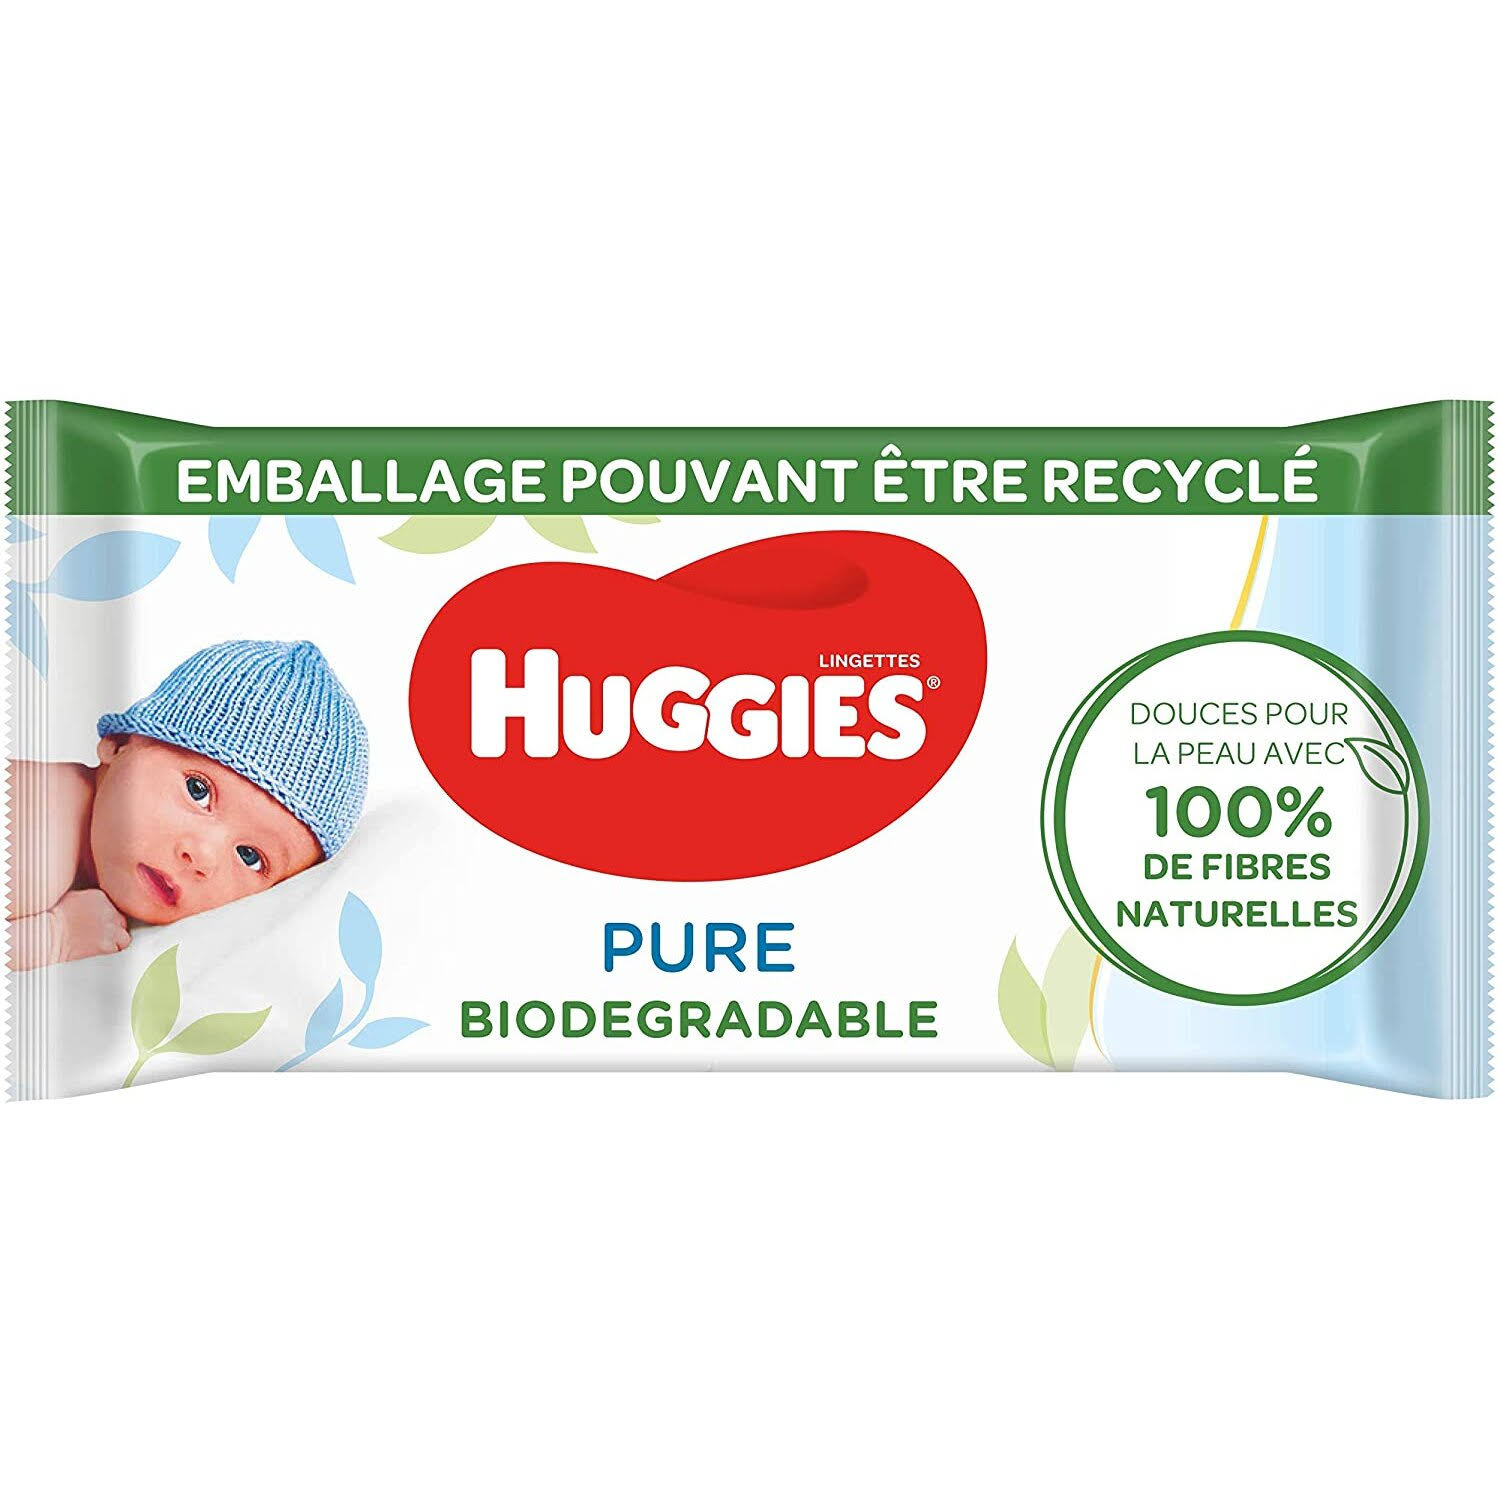 Boyce's Centra - Falcarragh - Huggies Pure Baby Wipes - 336 ct, Pack of 6 |  Pointy